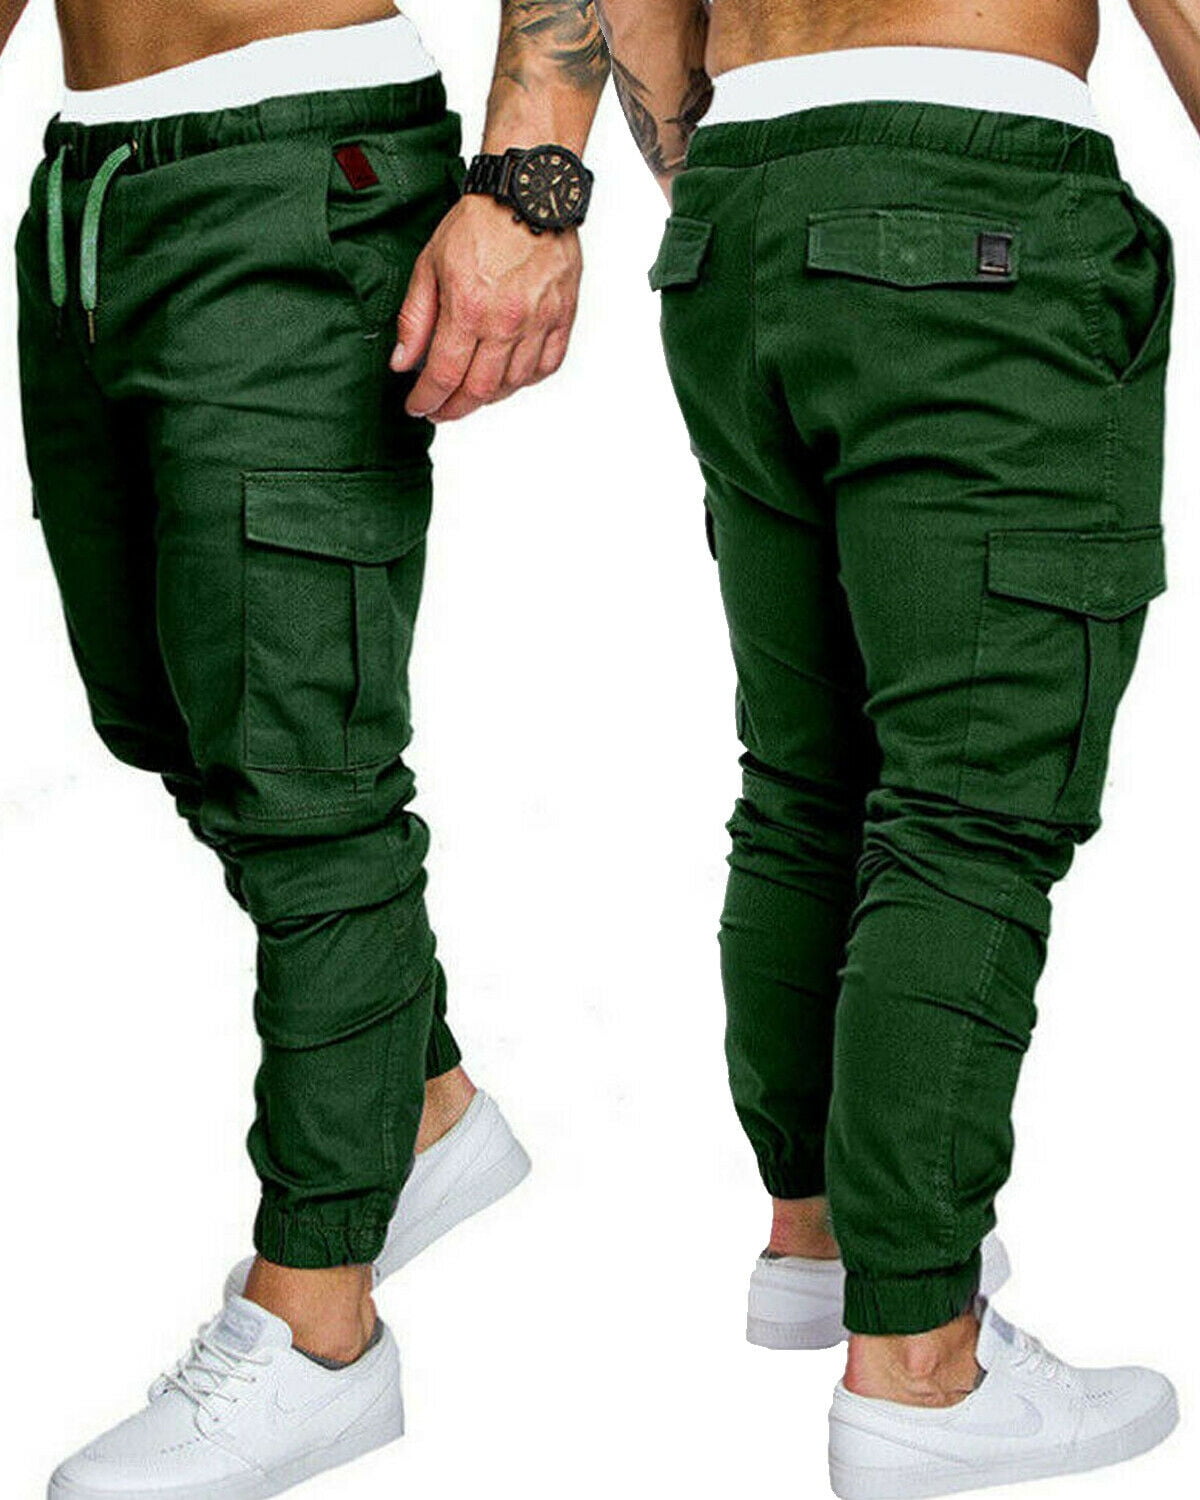 wsevypo - Mens Cargo Pants Elastic Banded ankle cuff Military Urban ...